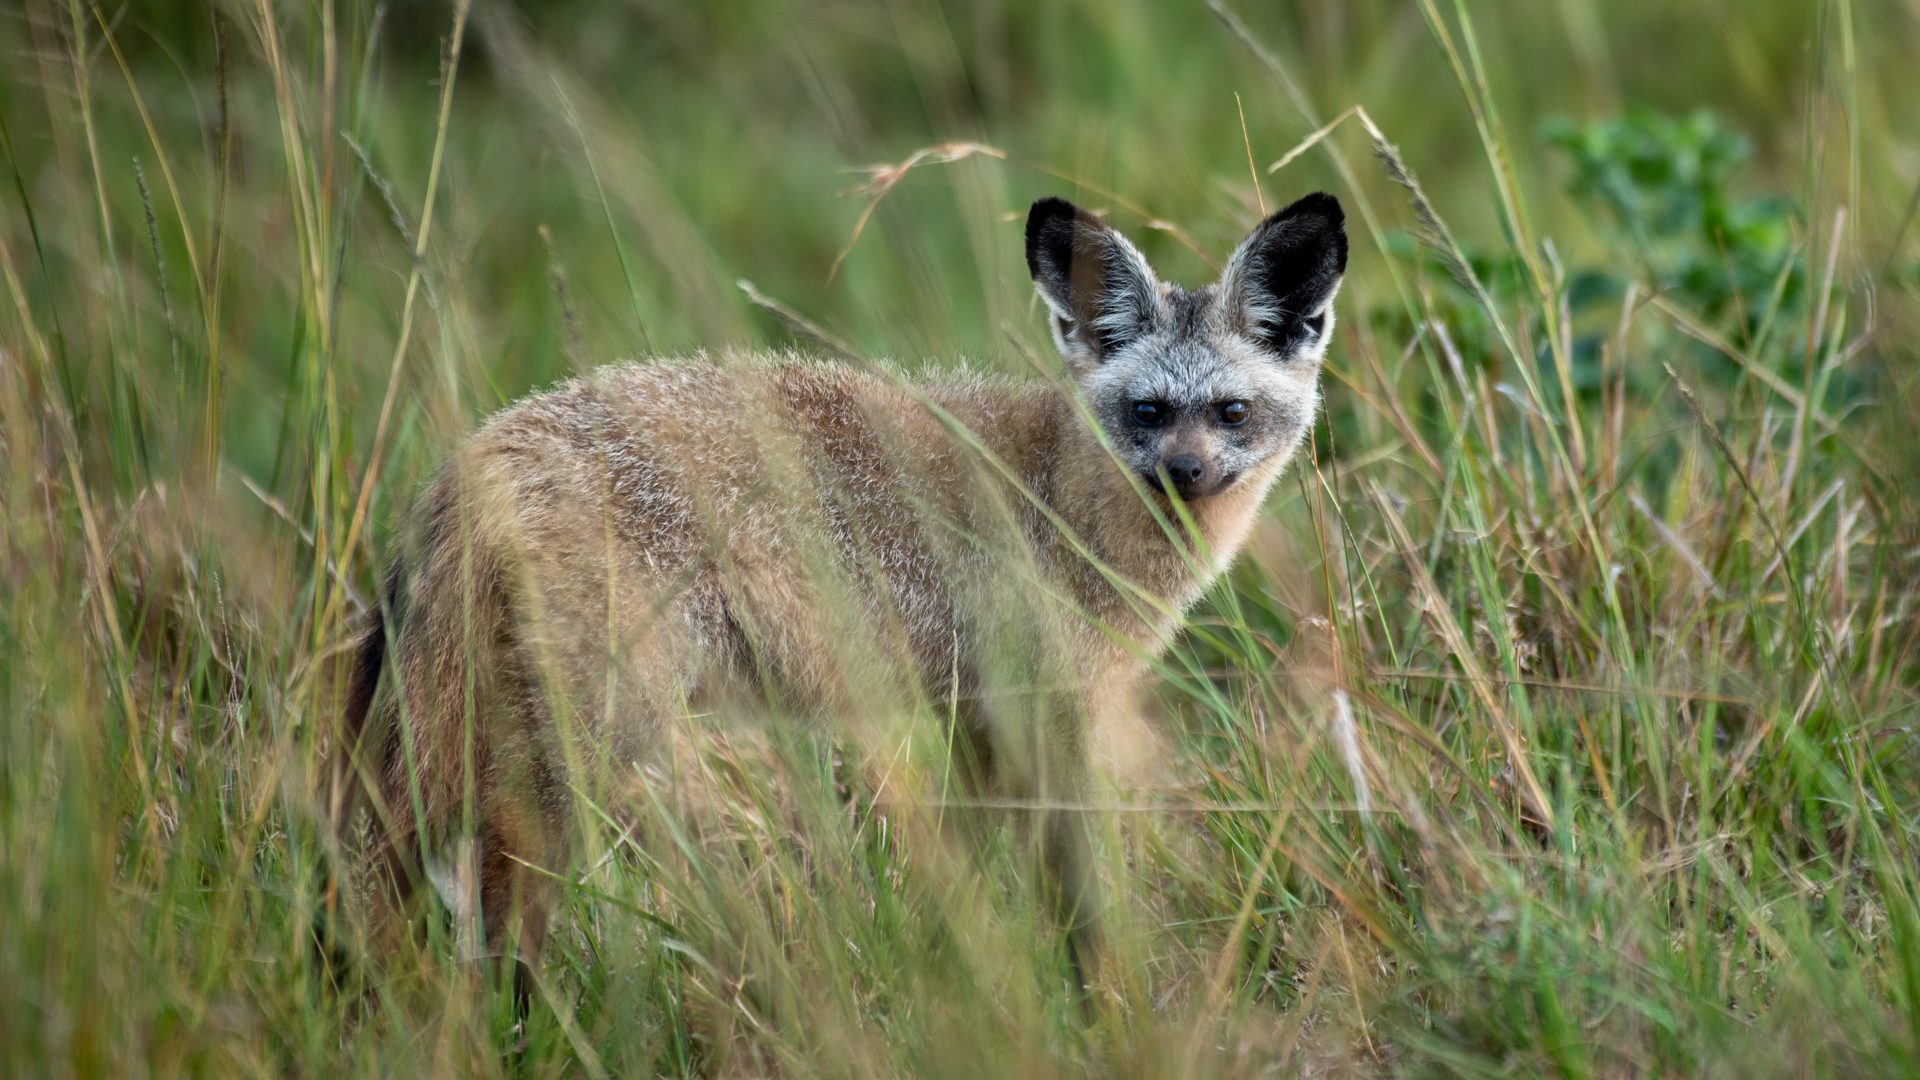 Above: The elusive yet endearing bat-eared fox